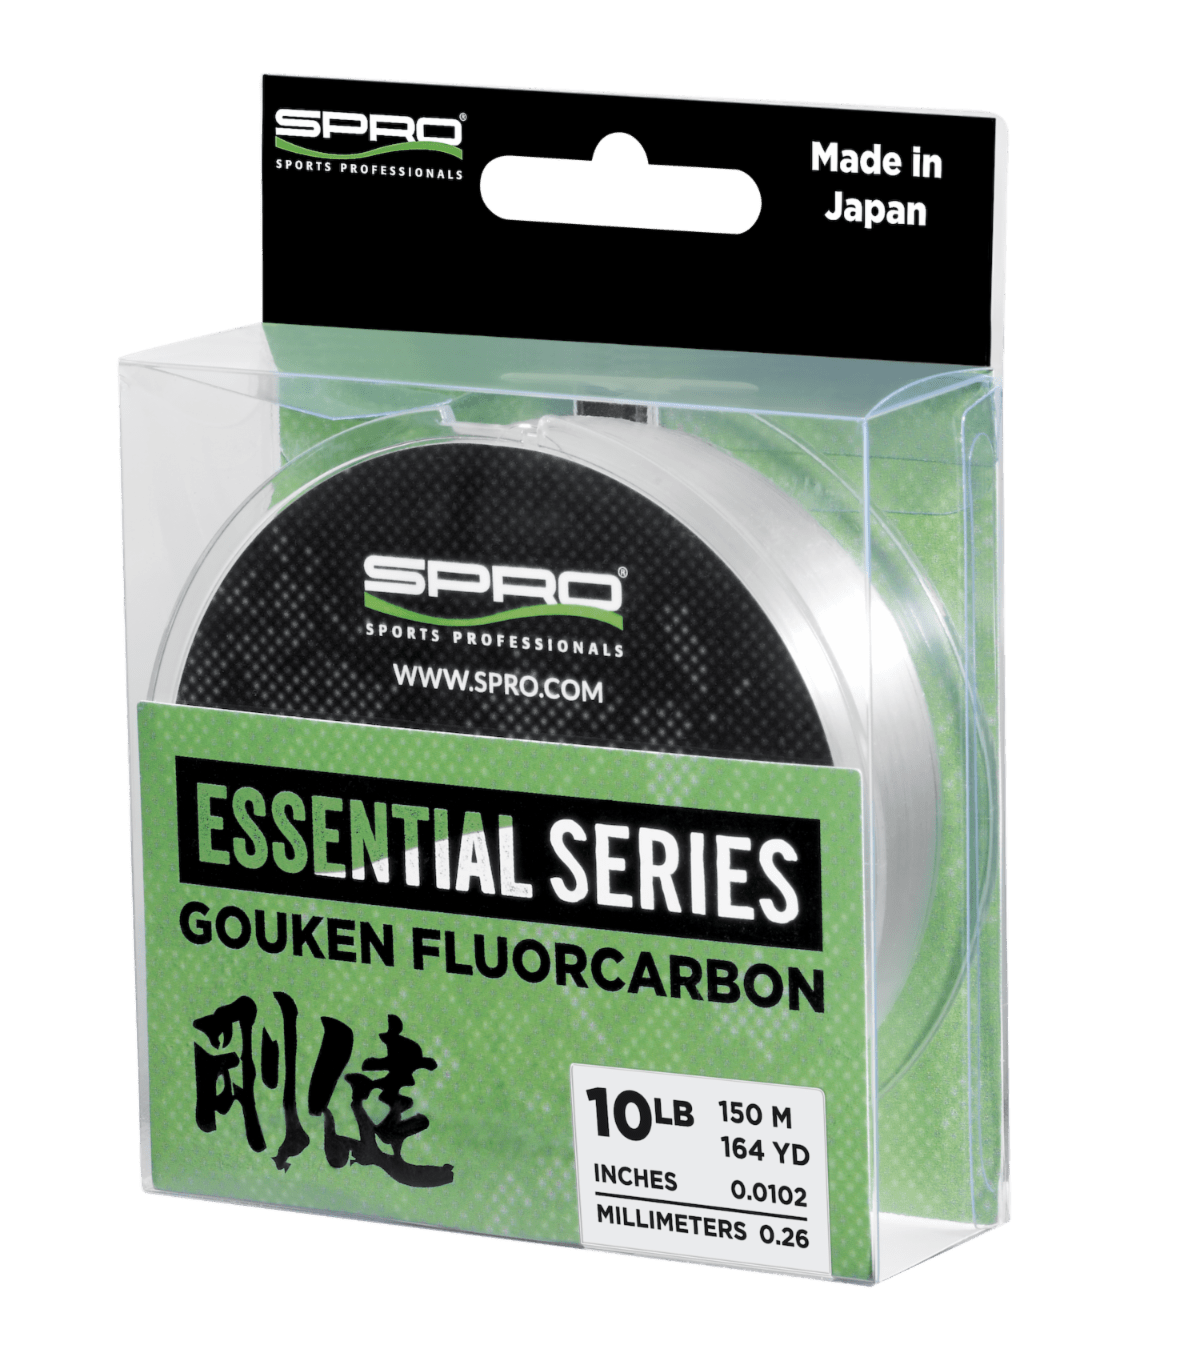 NEW for ICAST: SPRO Fluorocarbon Gouken Line is Tough as Nails